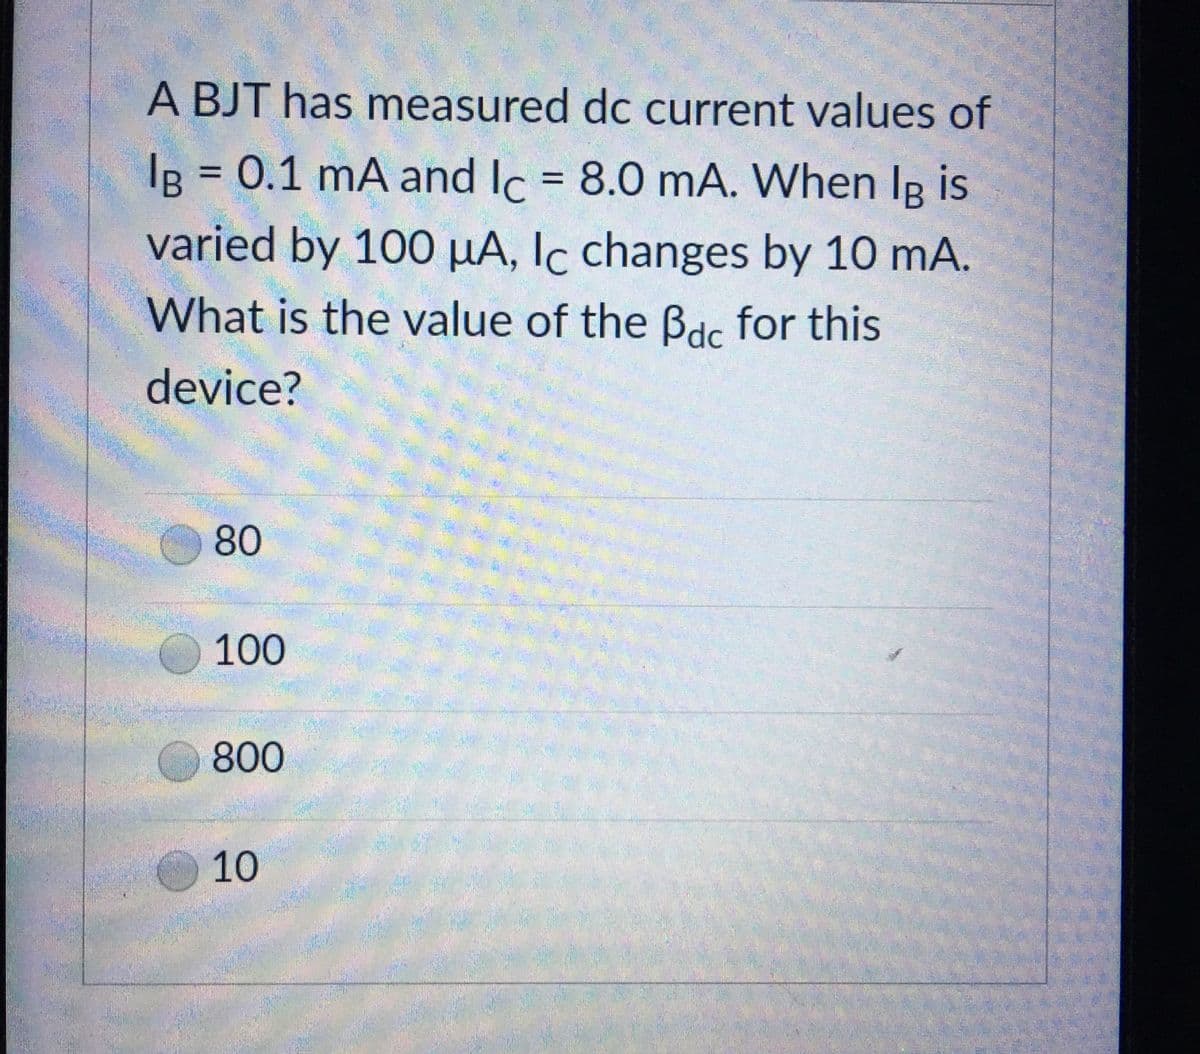 A BJT has measured dc current values of
IB = 0.1 mA and Ic = 8.0 mA. When Ig is
varied by 100 μA, Ic changes by 10 mA.
What is the value of the Bdc for this
device?
80
100
800
10
B